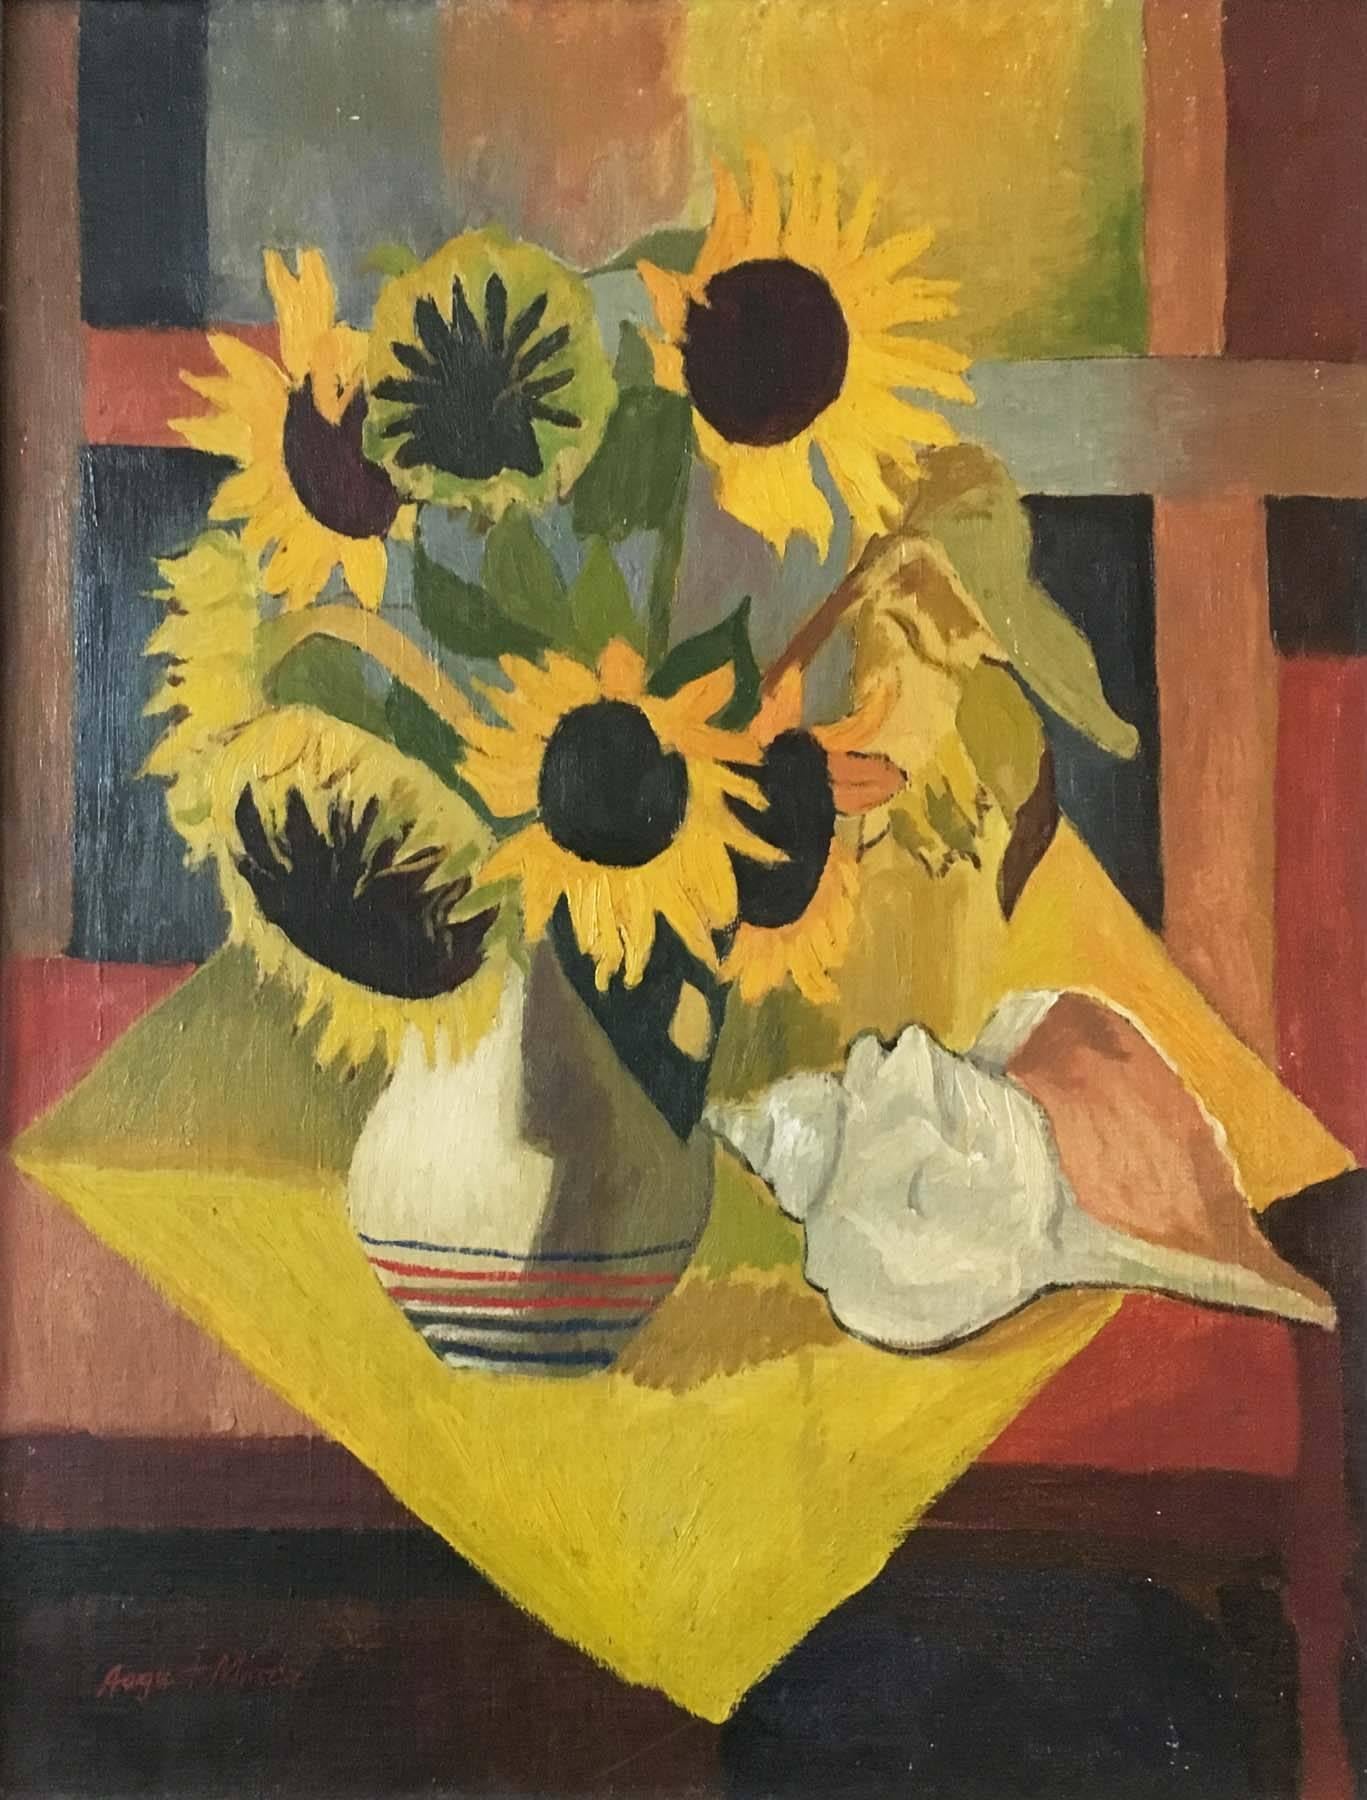 August Mosca Figurative Painting - Sunflowers